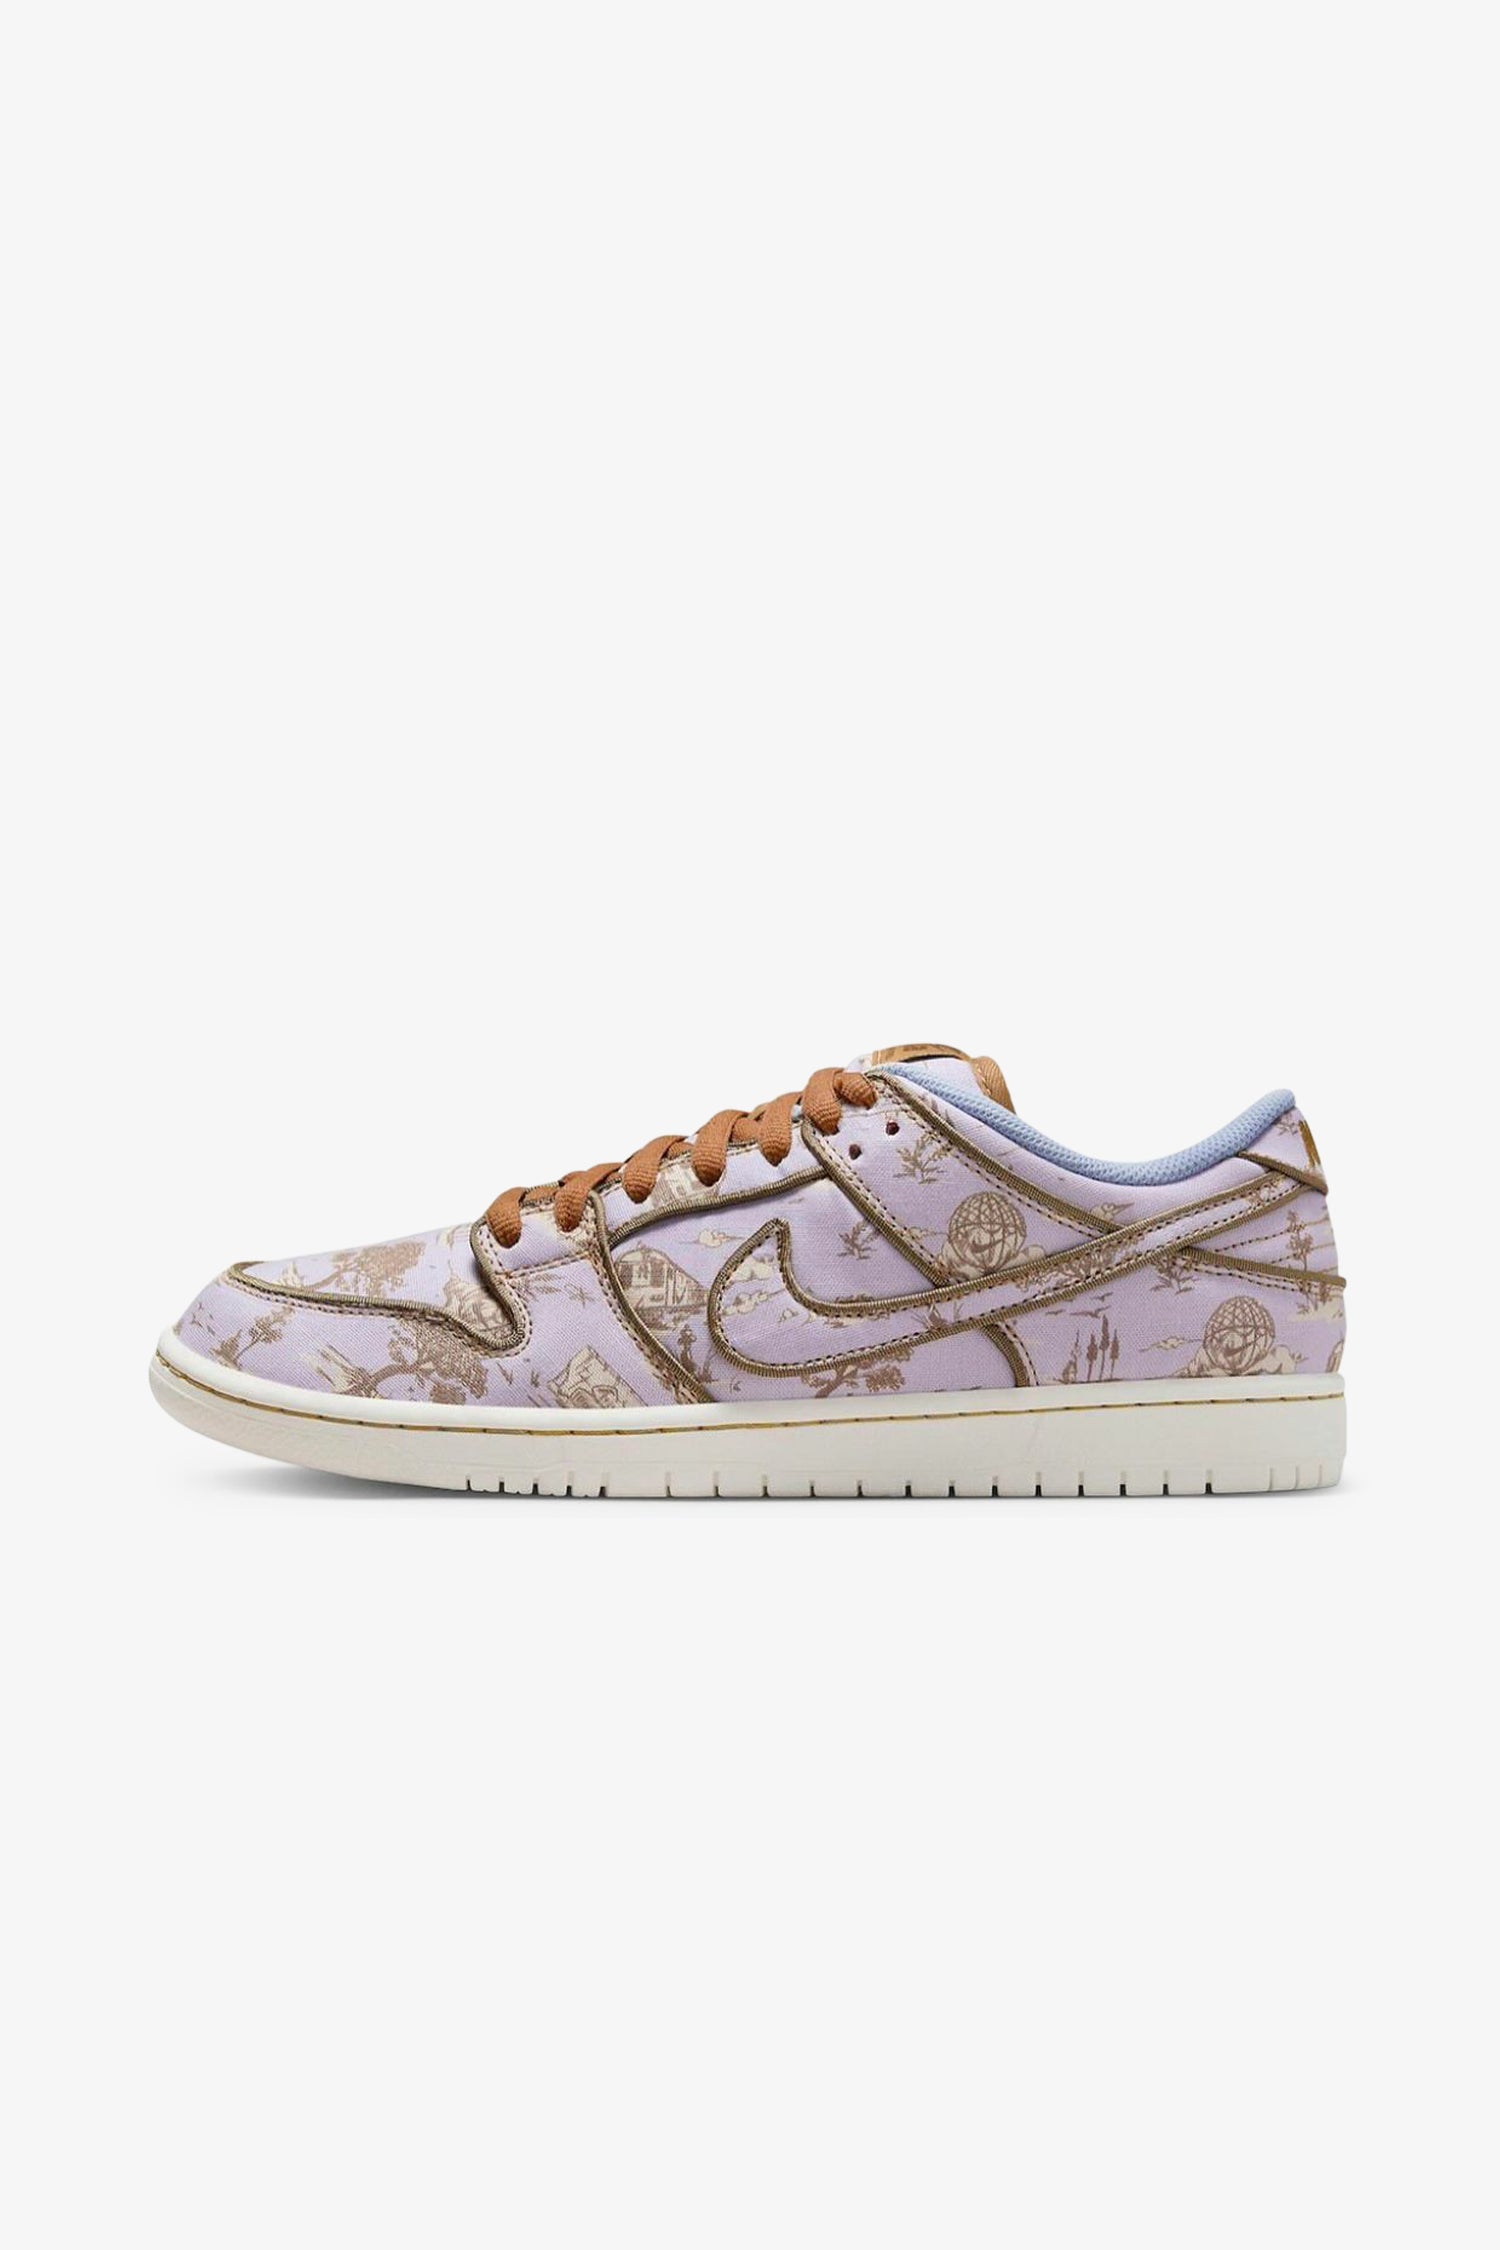 SB Dunk Low "City of Style"- Selectshop FRAME